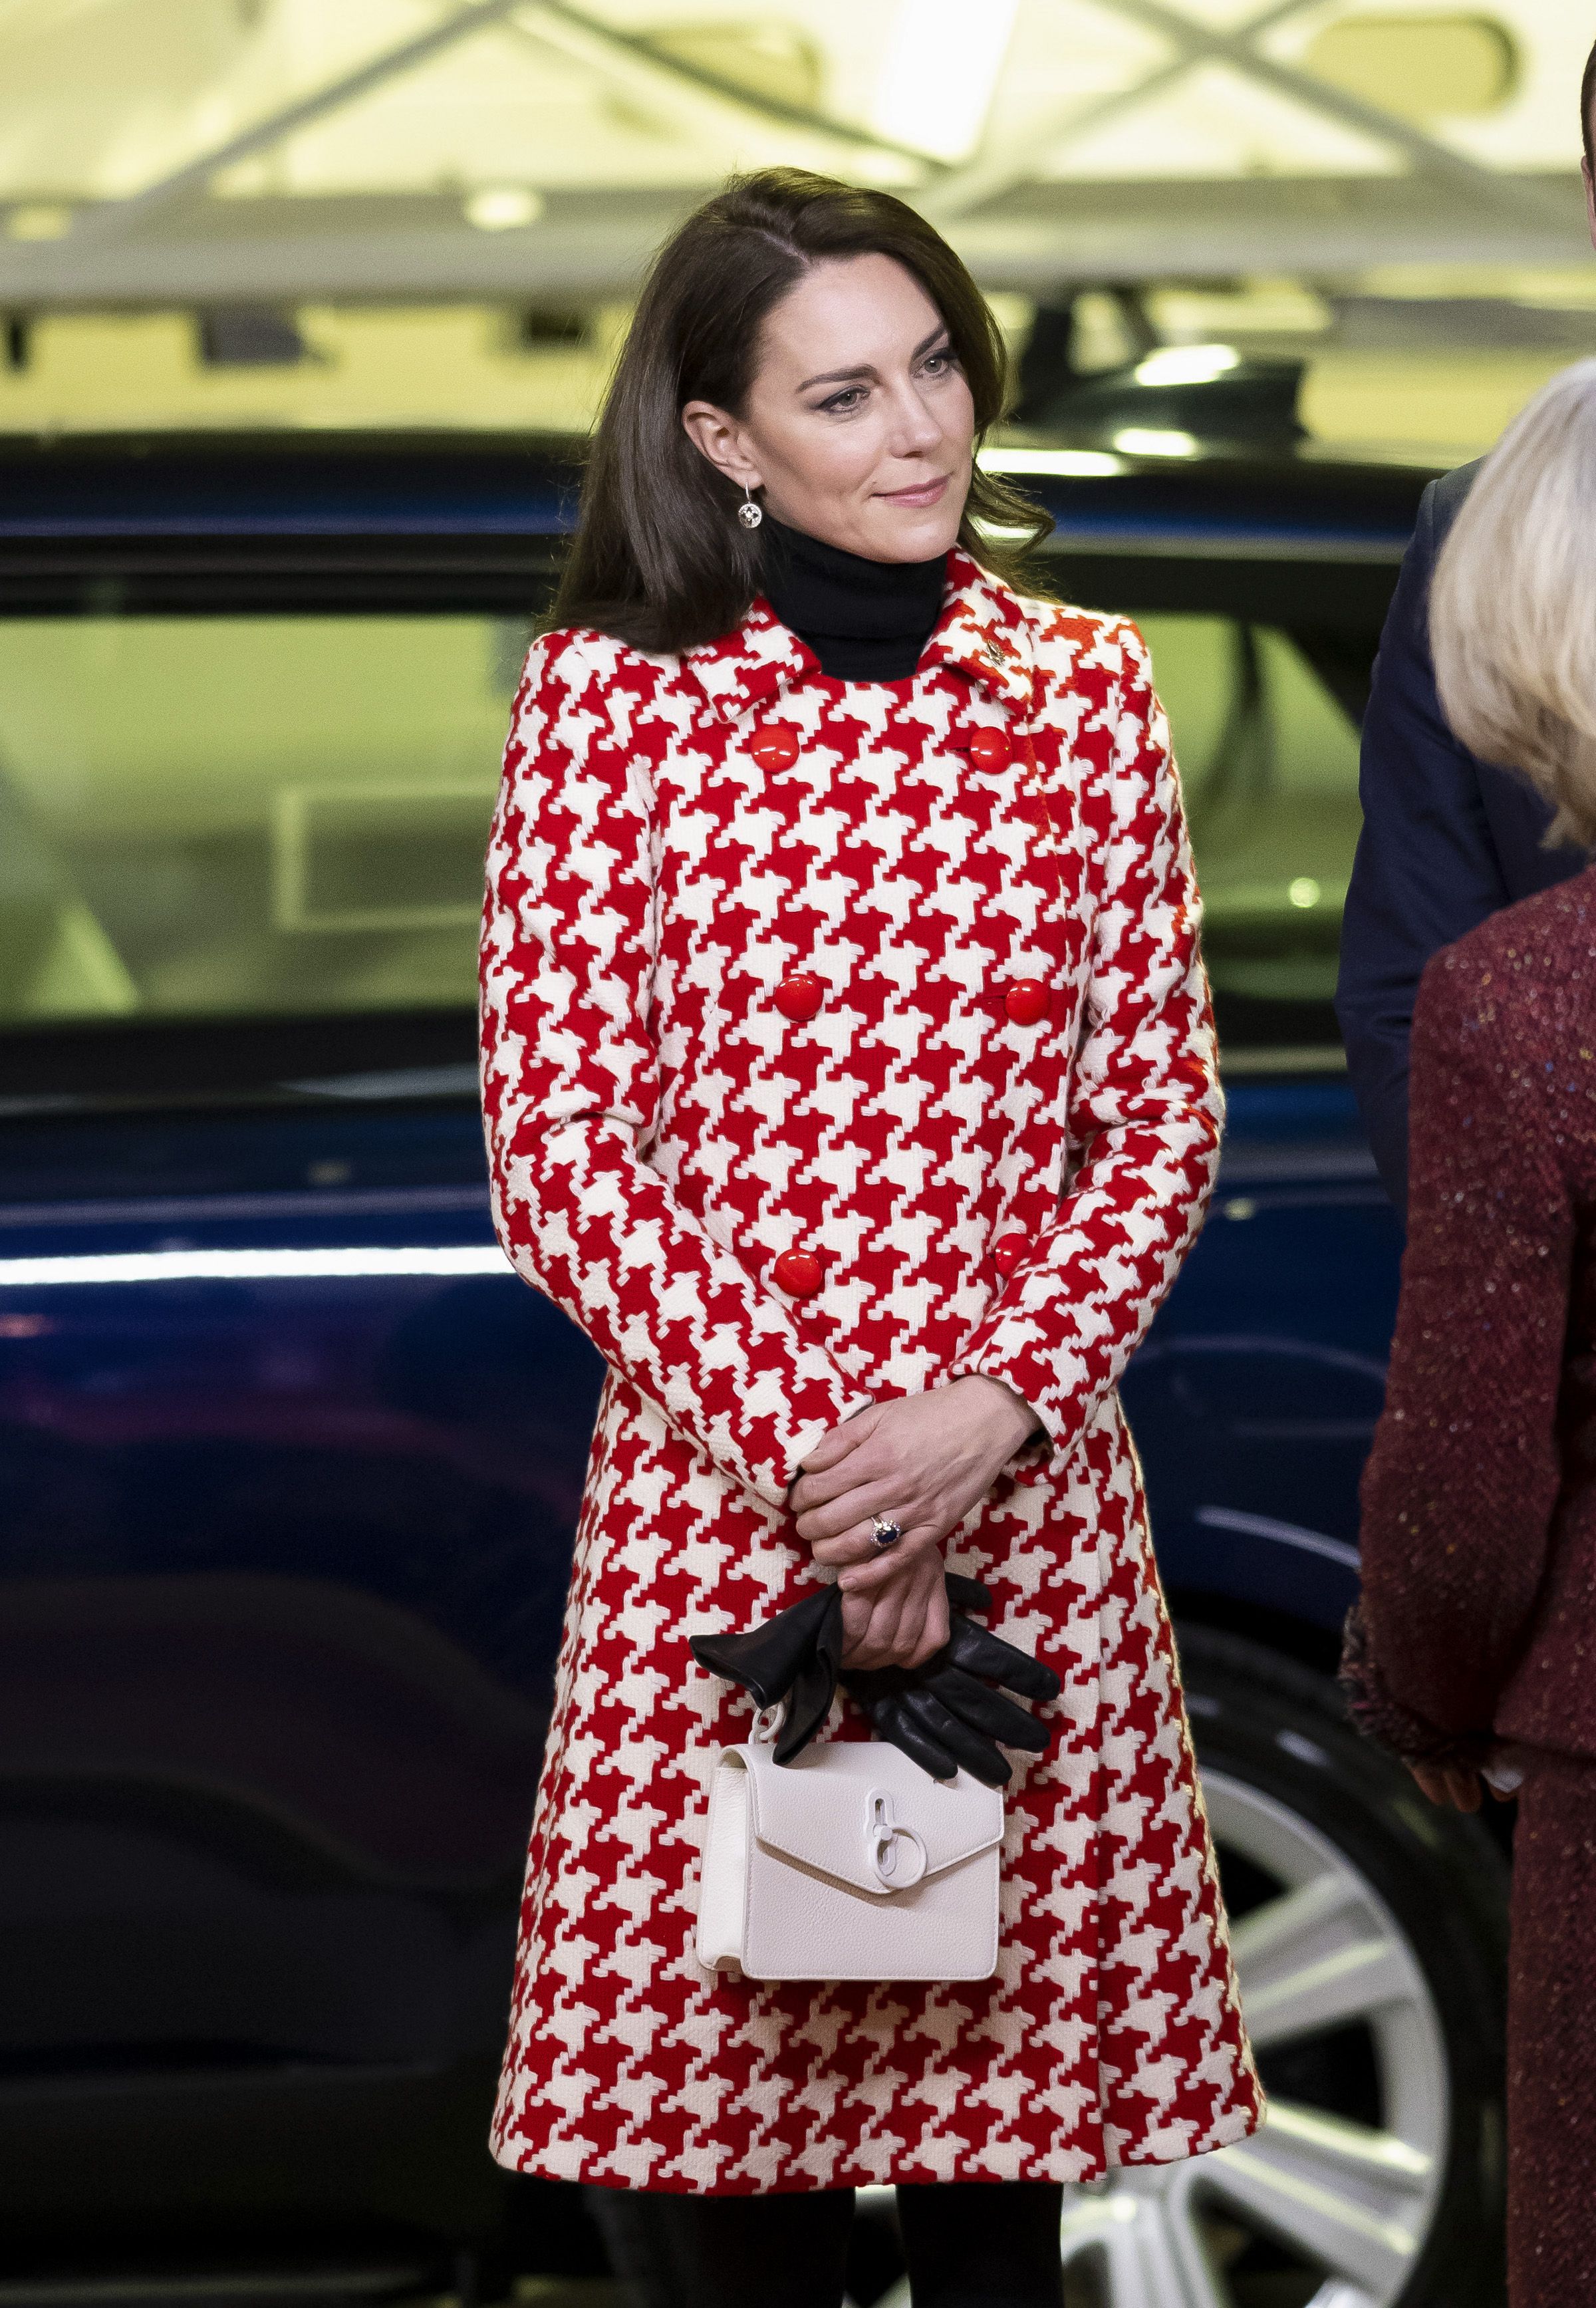 See Princess Kate Rewear Her Red Houndstooth Coat Dress to a Rugby Match